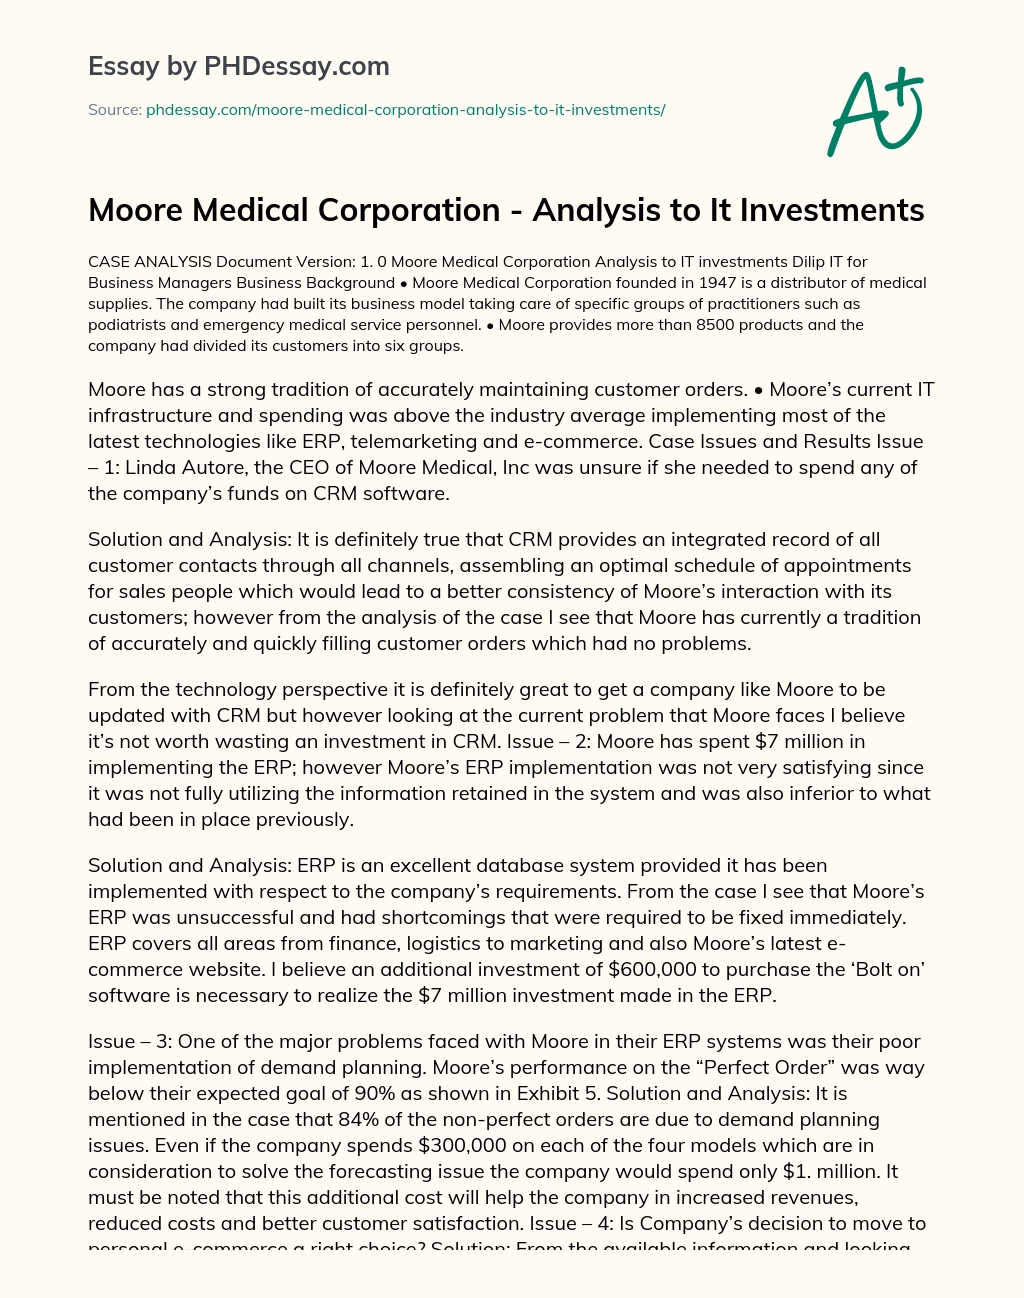 Moore Medical Corporation – Analysis to It Investments essay